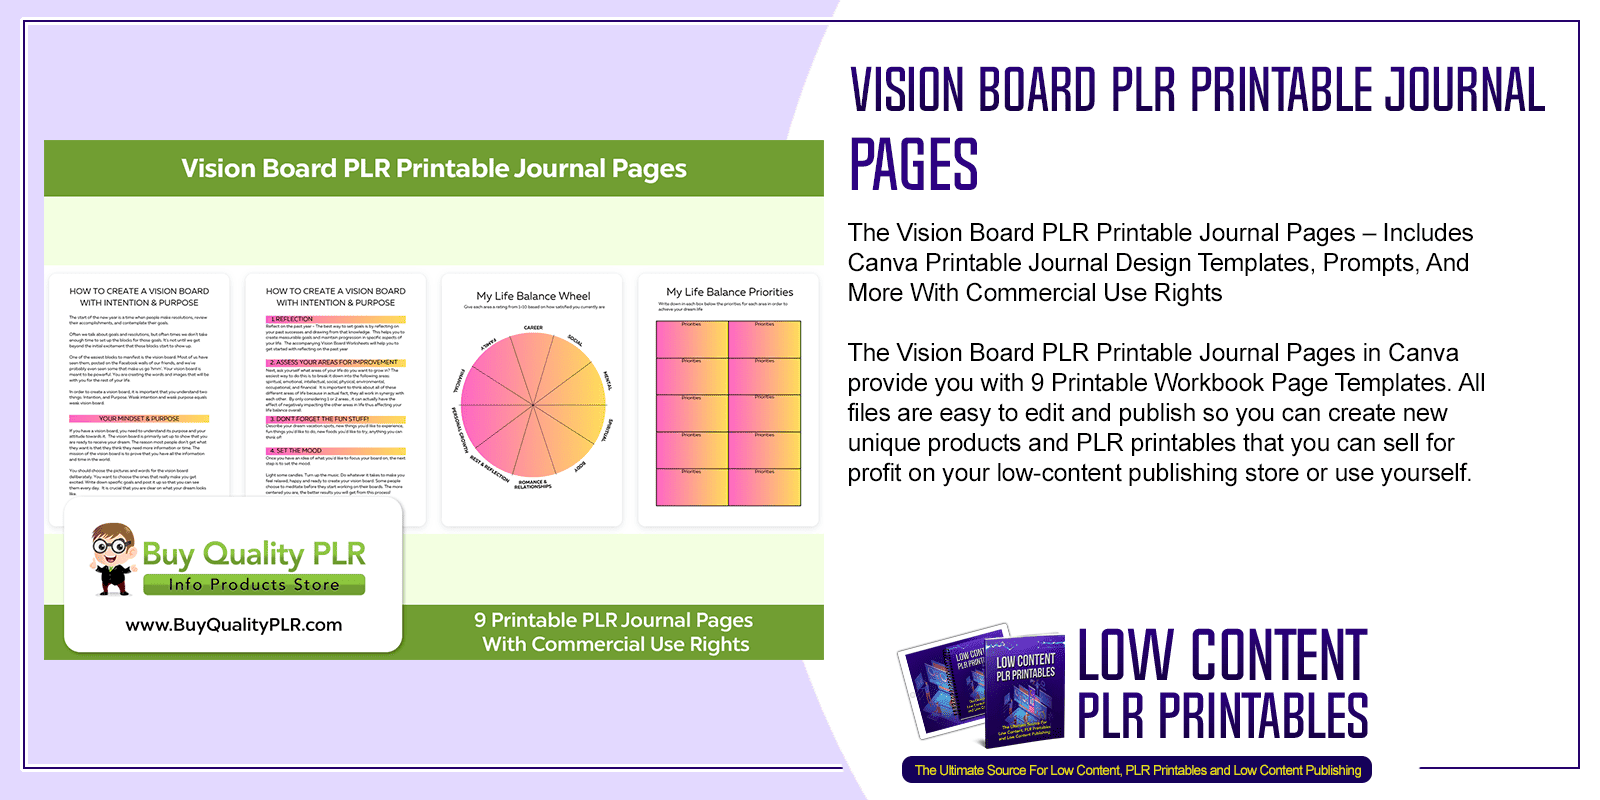 Vision Board PLR Printable Journal Pages